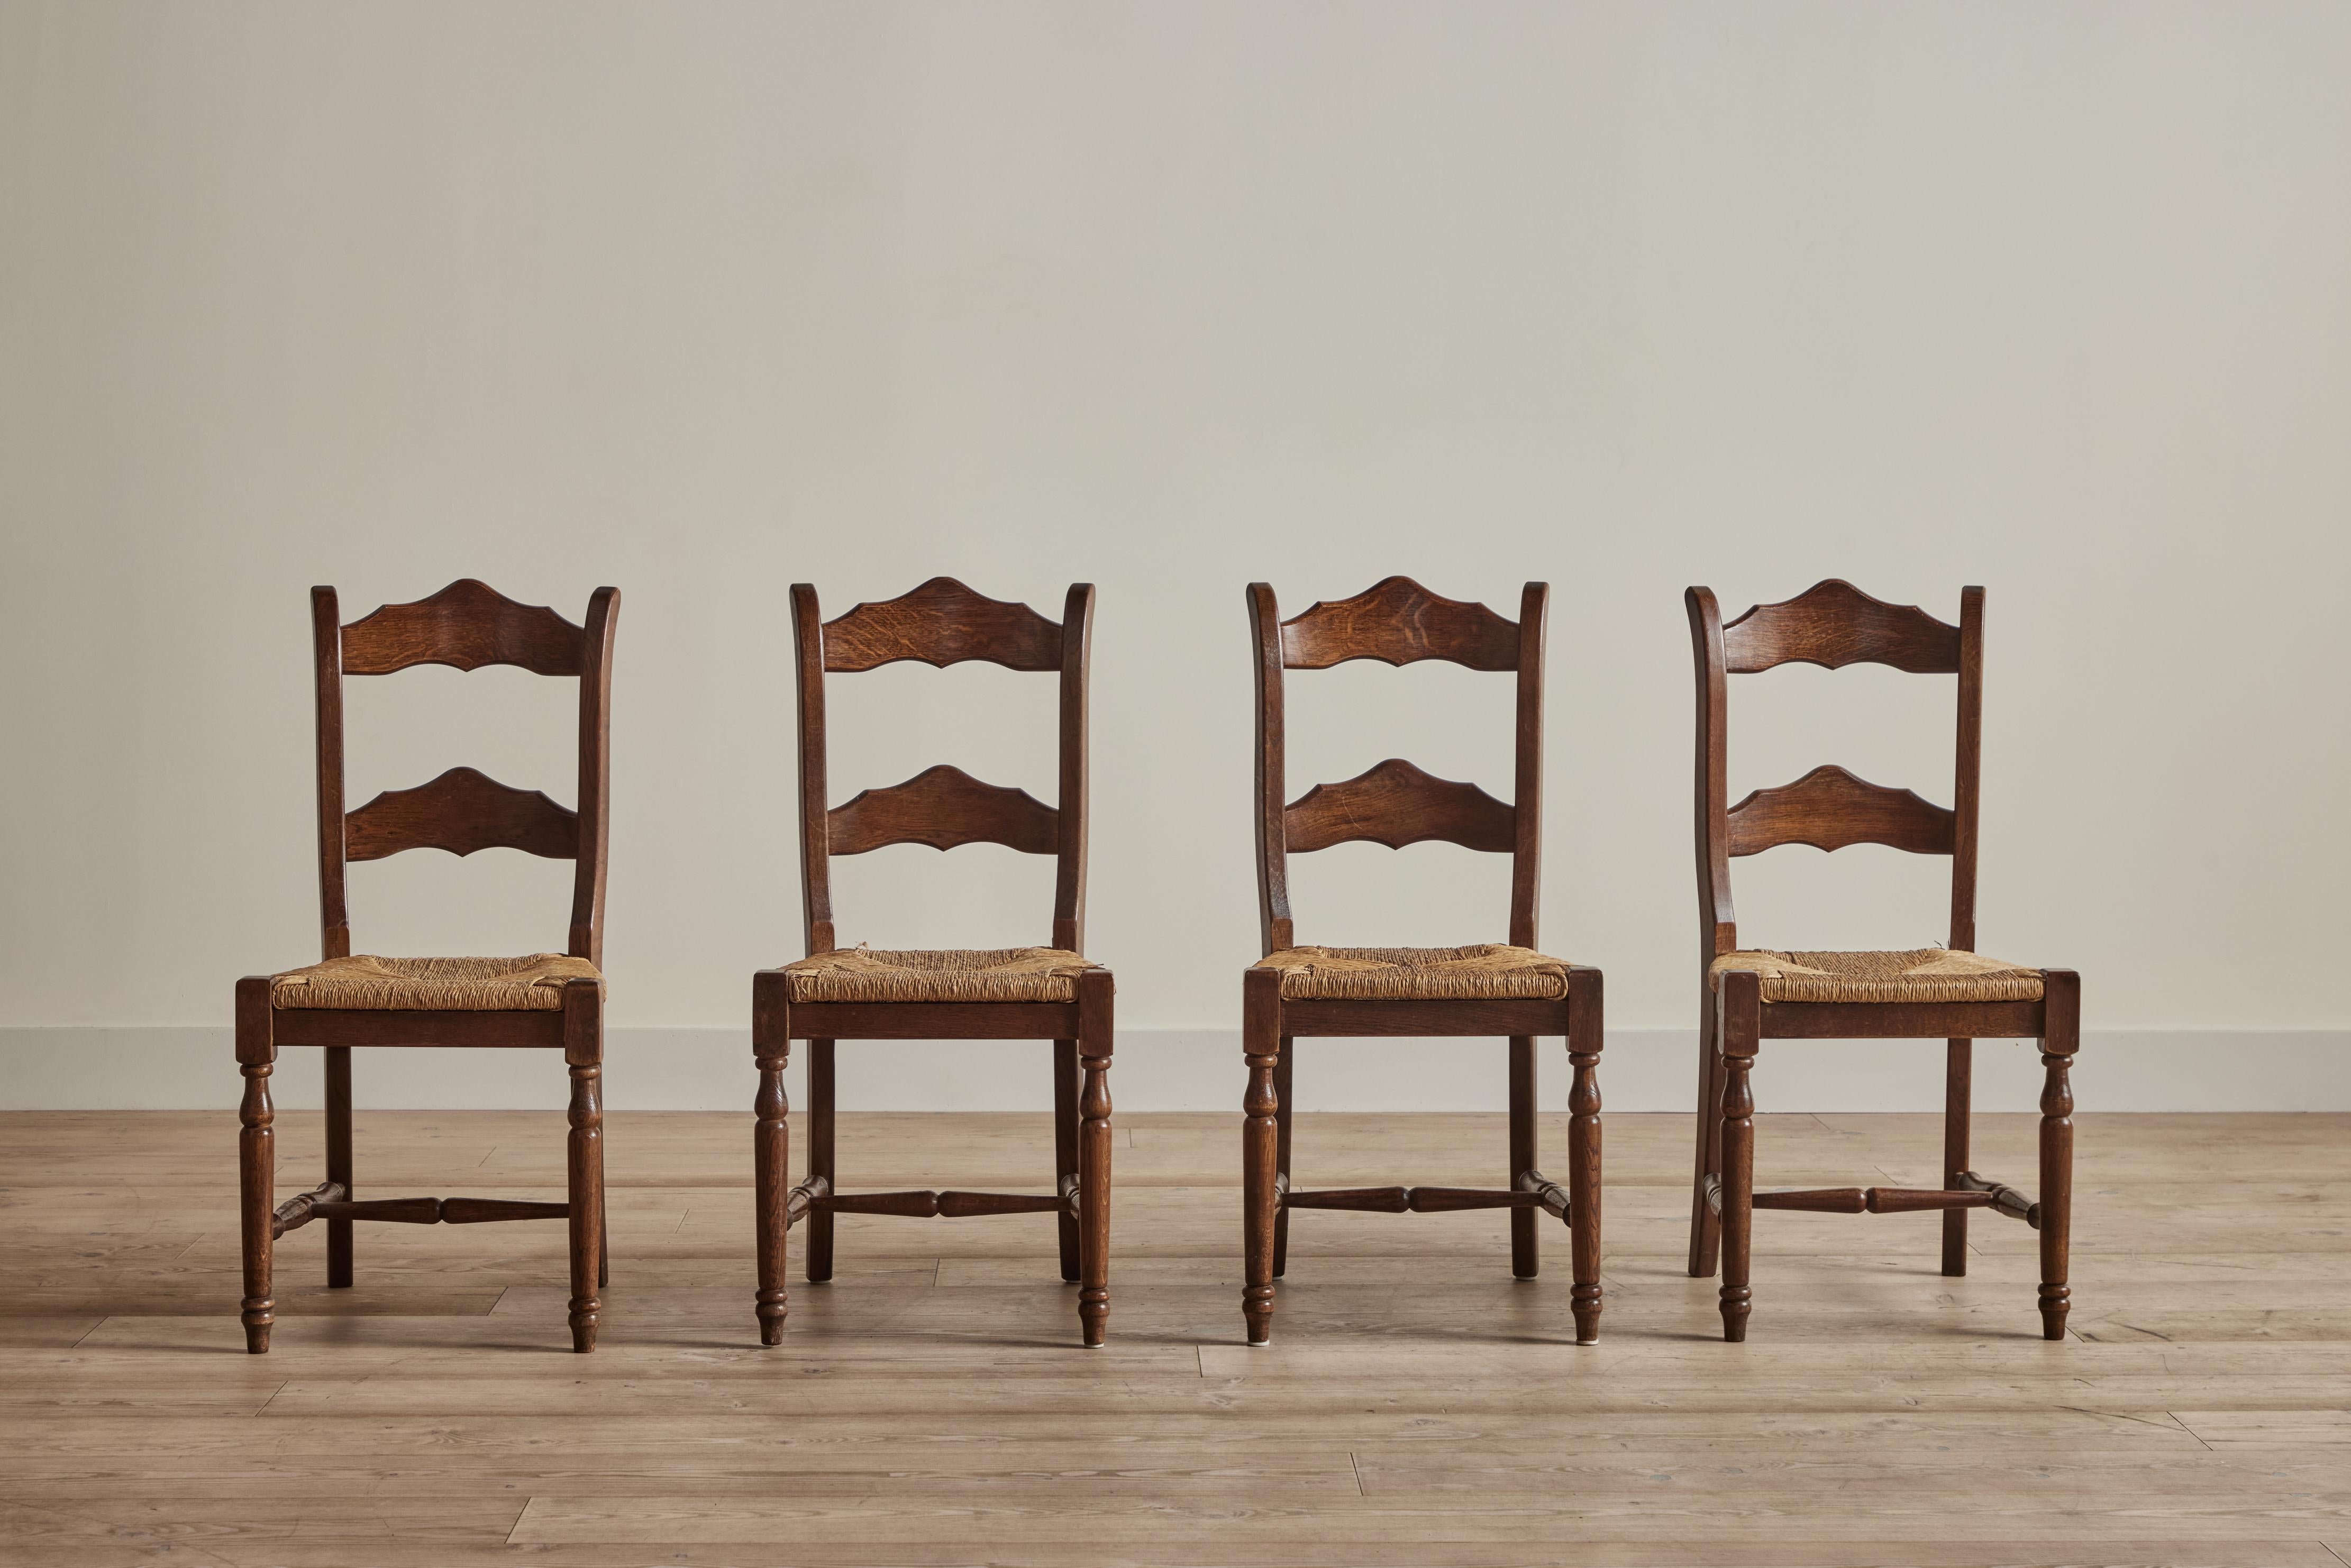 Set of four Dutch ladder back dining chairs with rush seats circa 1850. Some wear and loss on rush seats and wood frames is consistent with age and use.